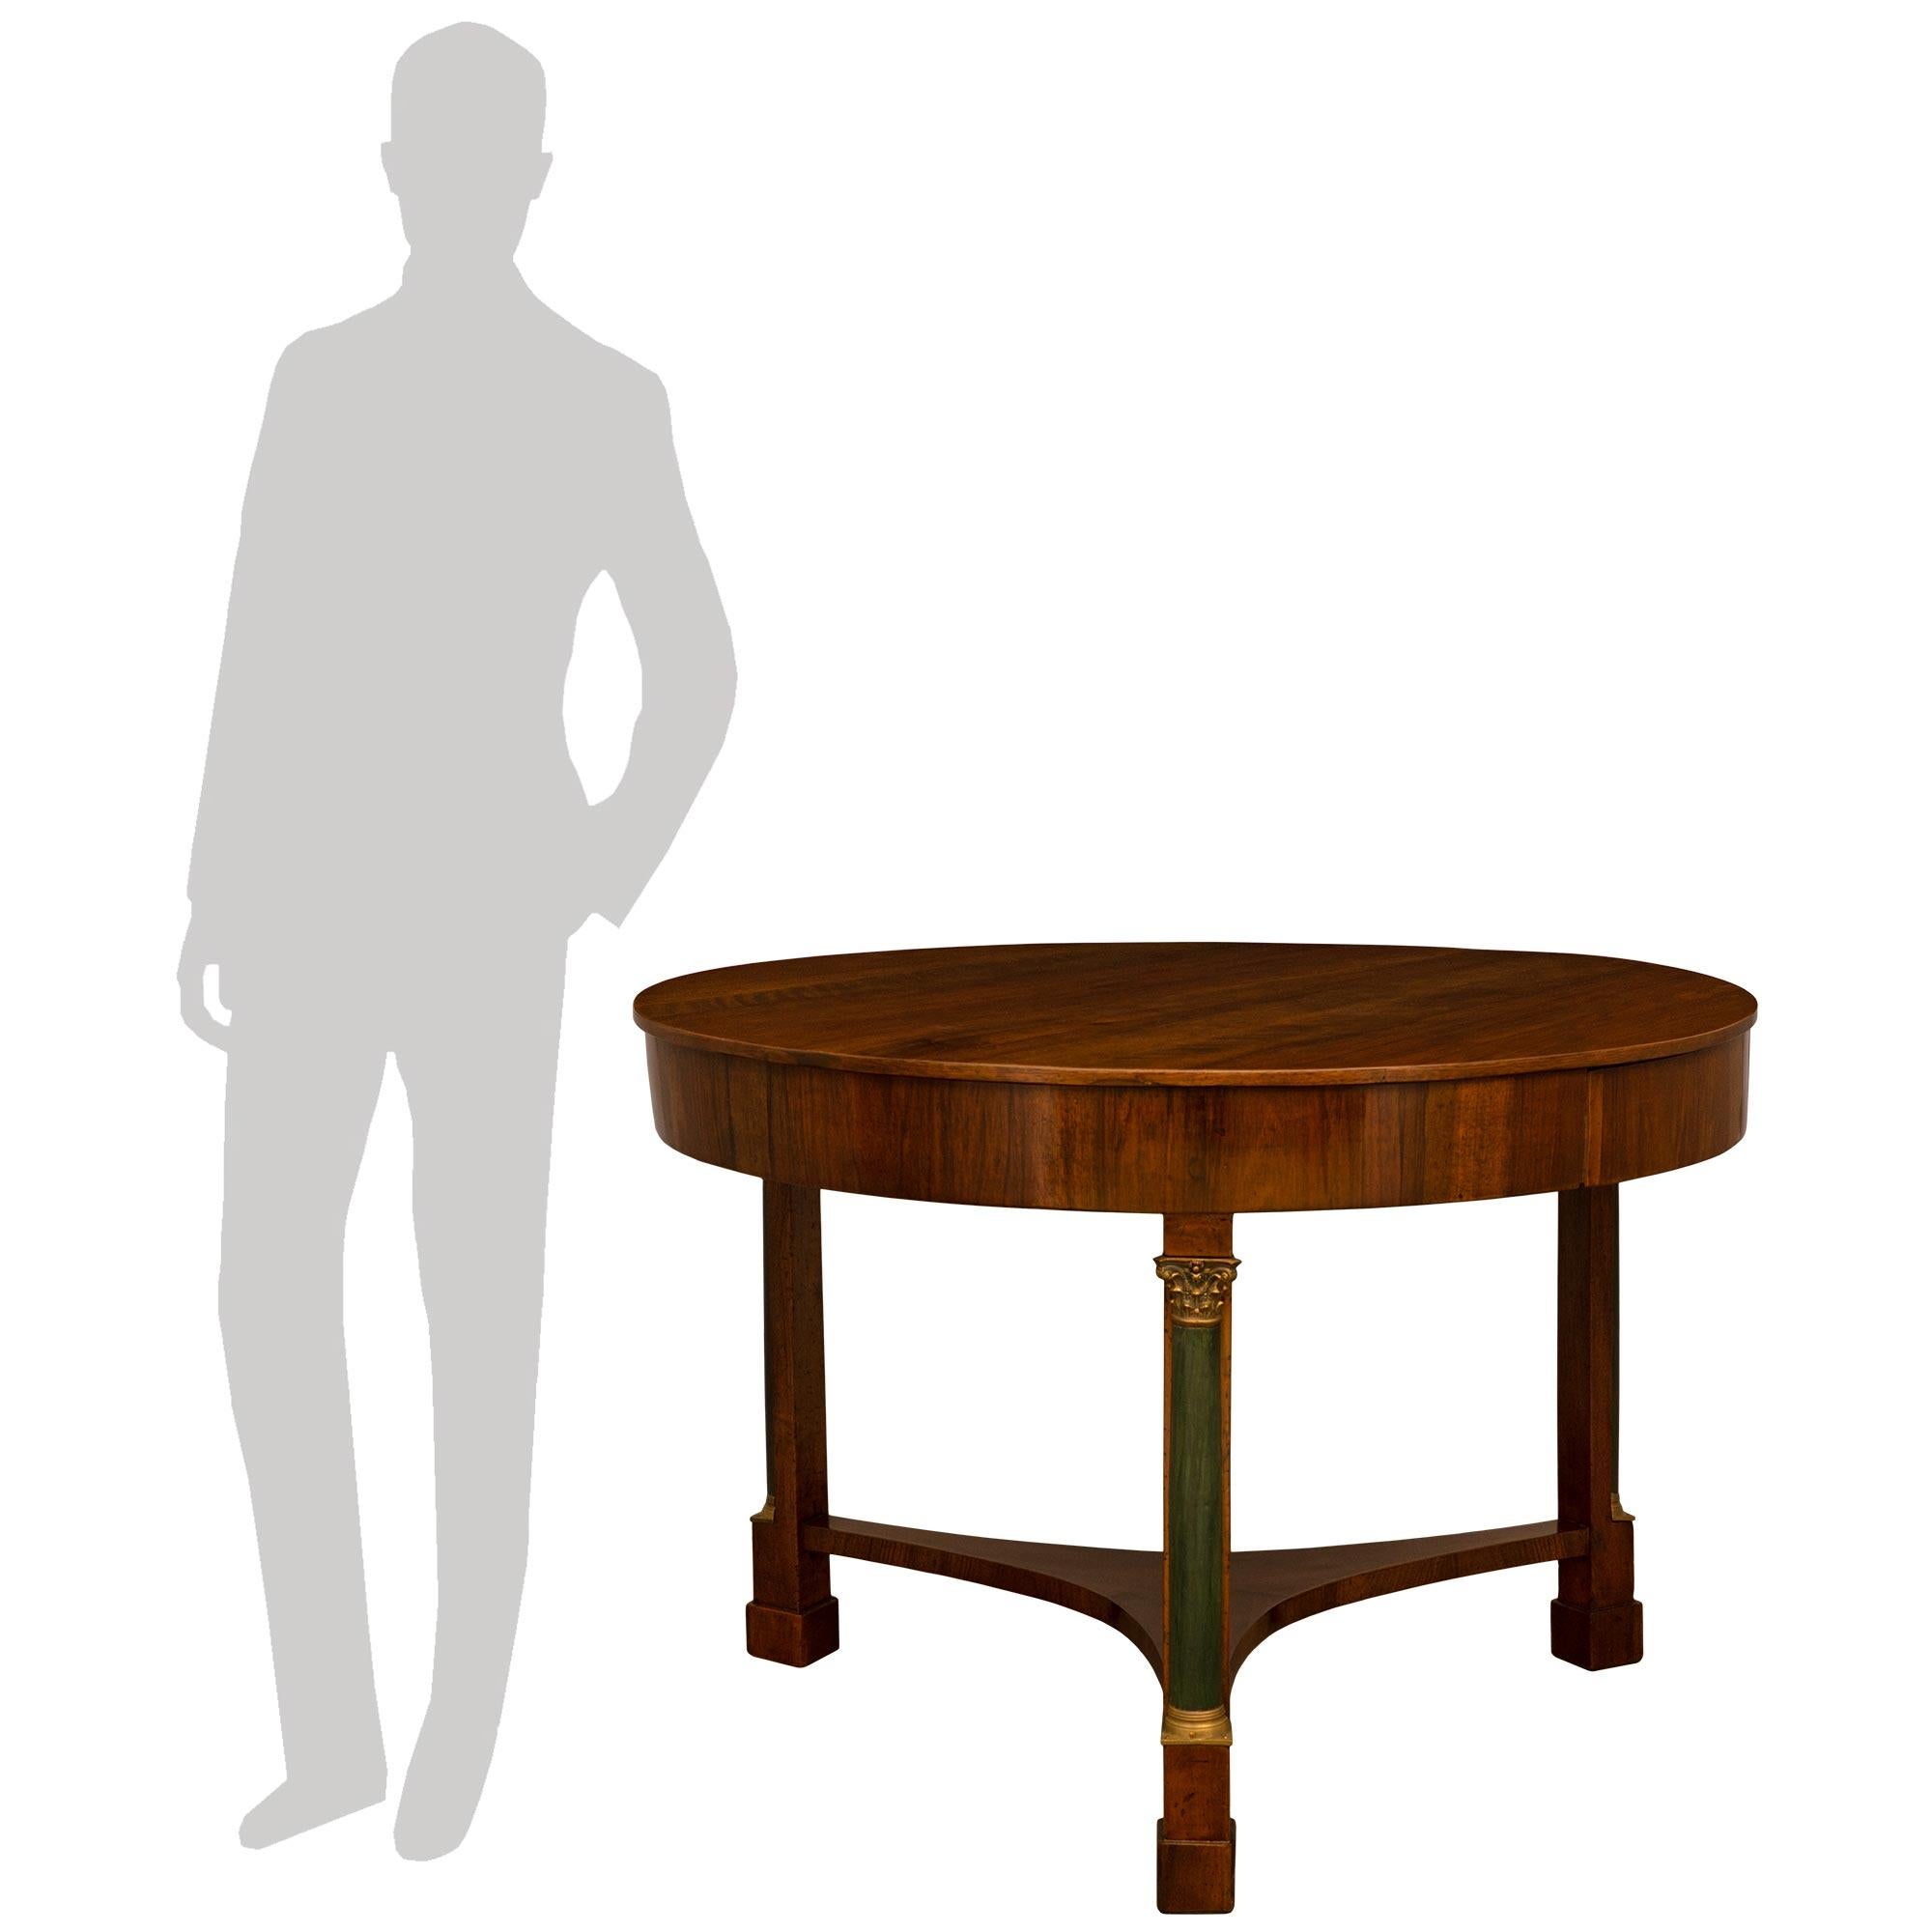 A handsome Italian 18th century neo-classical walnut center table with one drawer. The table is raised by three handsome square legs with an outstanding patinated column with a fine brass plinth and capital. Each leg is connected by an elegant